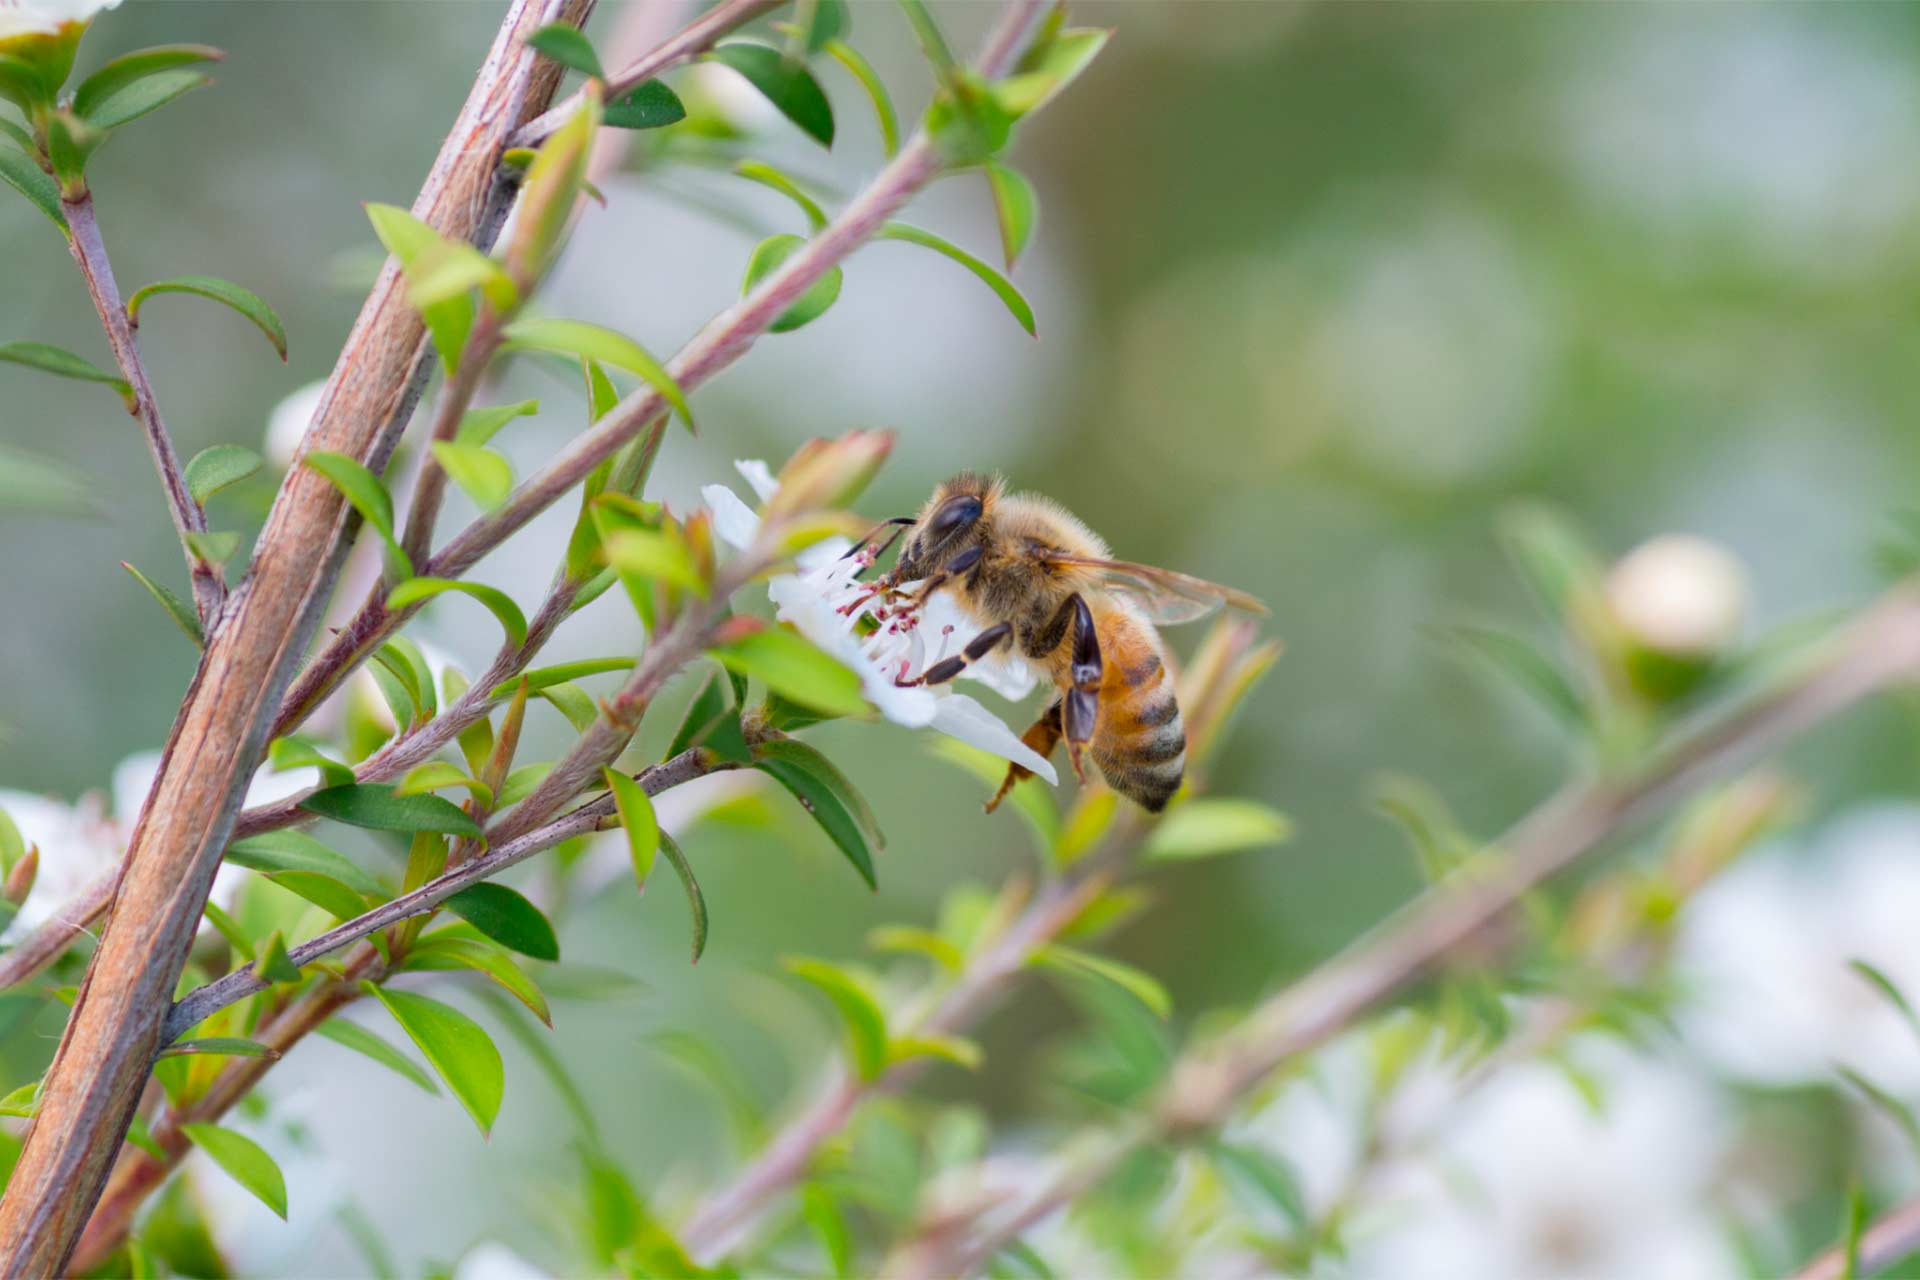 A bee gathers nectar from a New Zealand tea tree flower